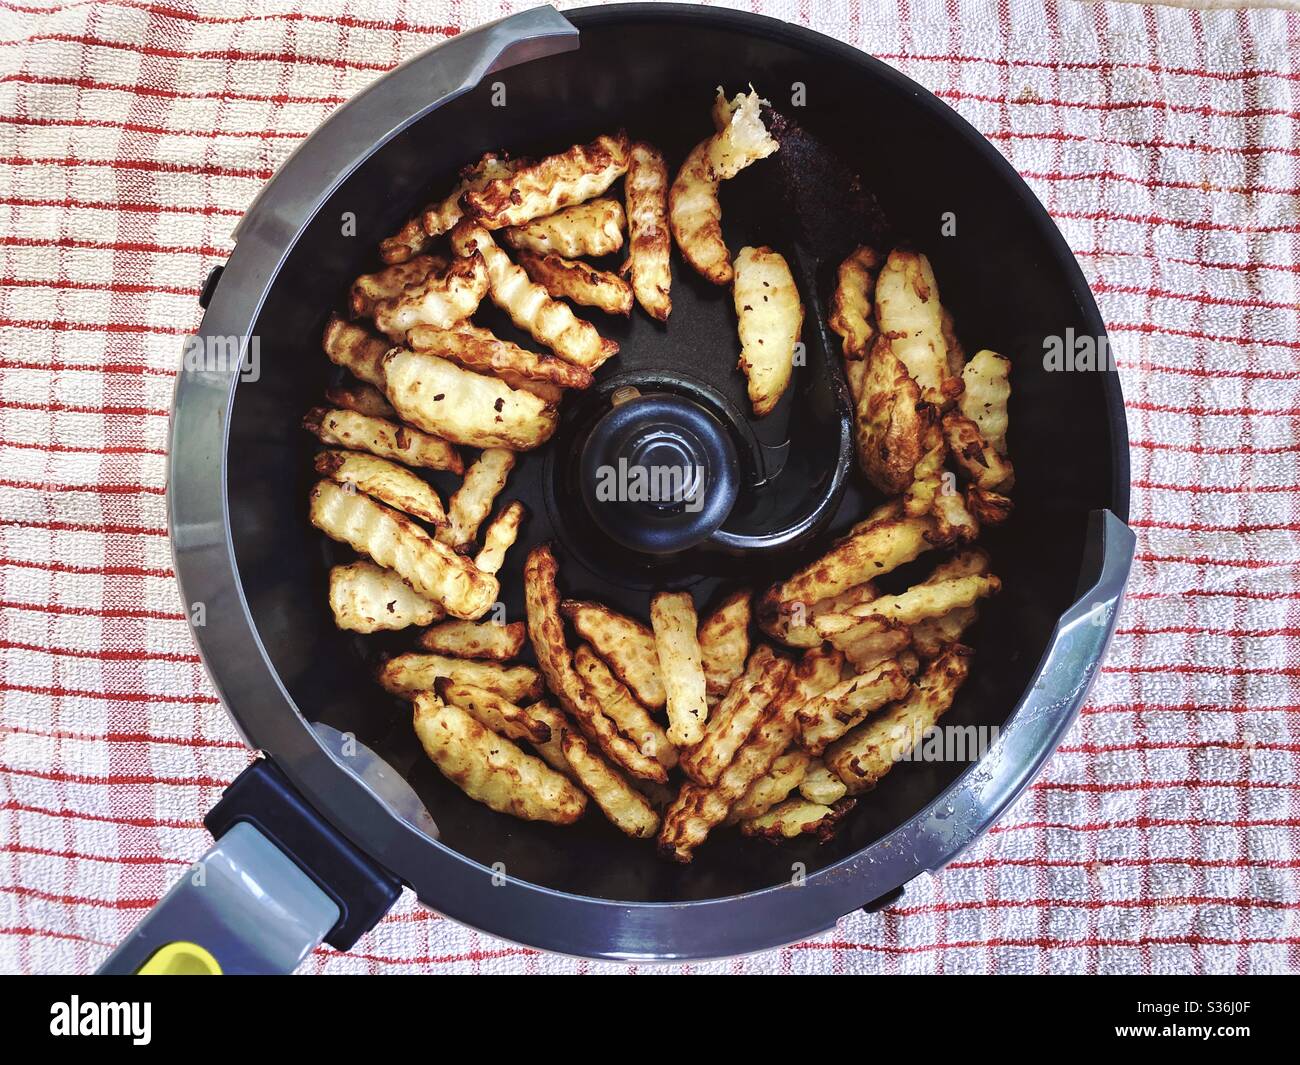 https://c8.alamy.com/comp/S36J0F/closeup-view-of-crinkle-cut-fries-in-the-pan-of-a-rotating-air-fryer-homemade-fries-with-a-crinkle-cutter-fried-in-hot-air-a-healthier-way-of-cooking-crispy-potato-chips-for-dinner-S36J0F.jpg